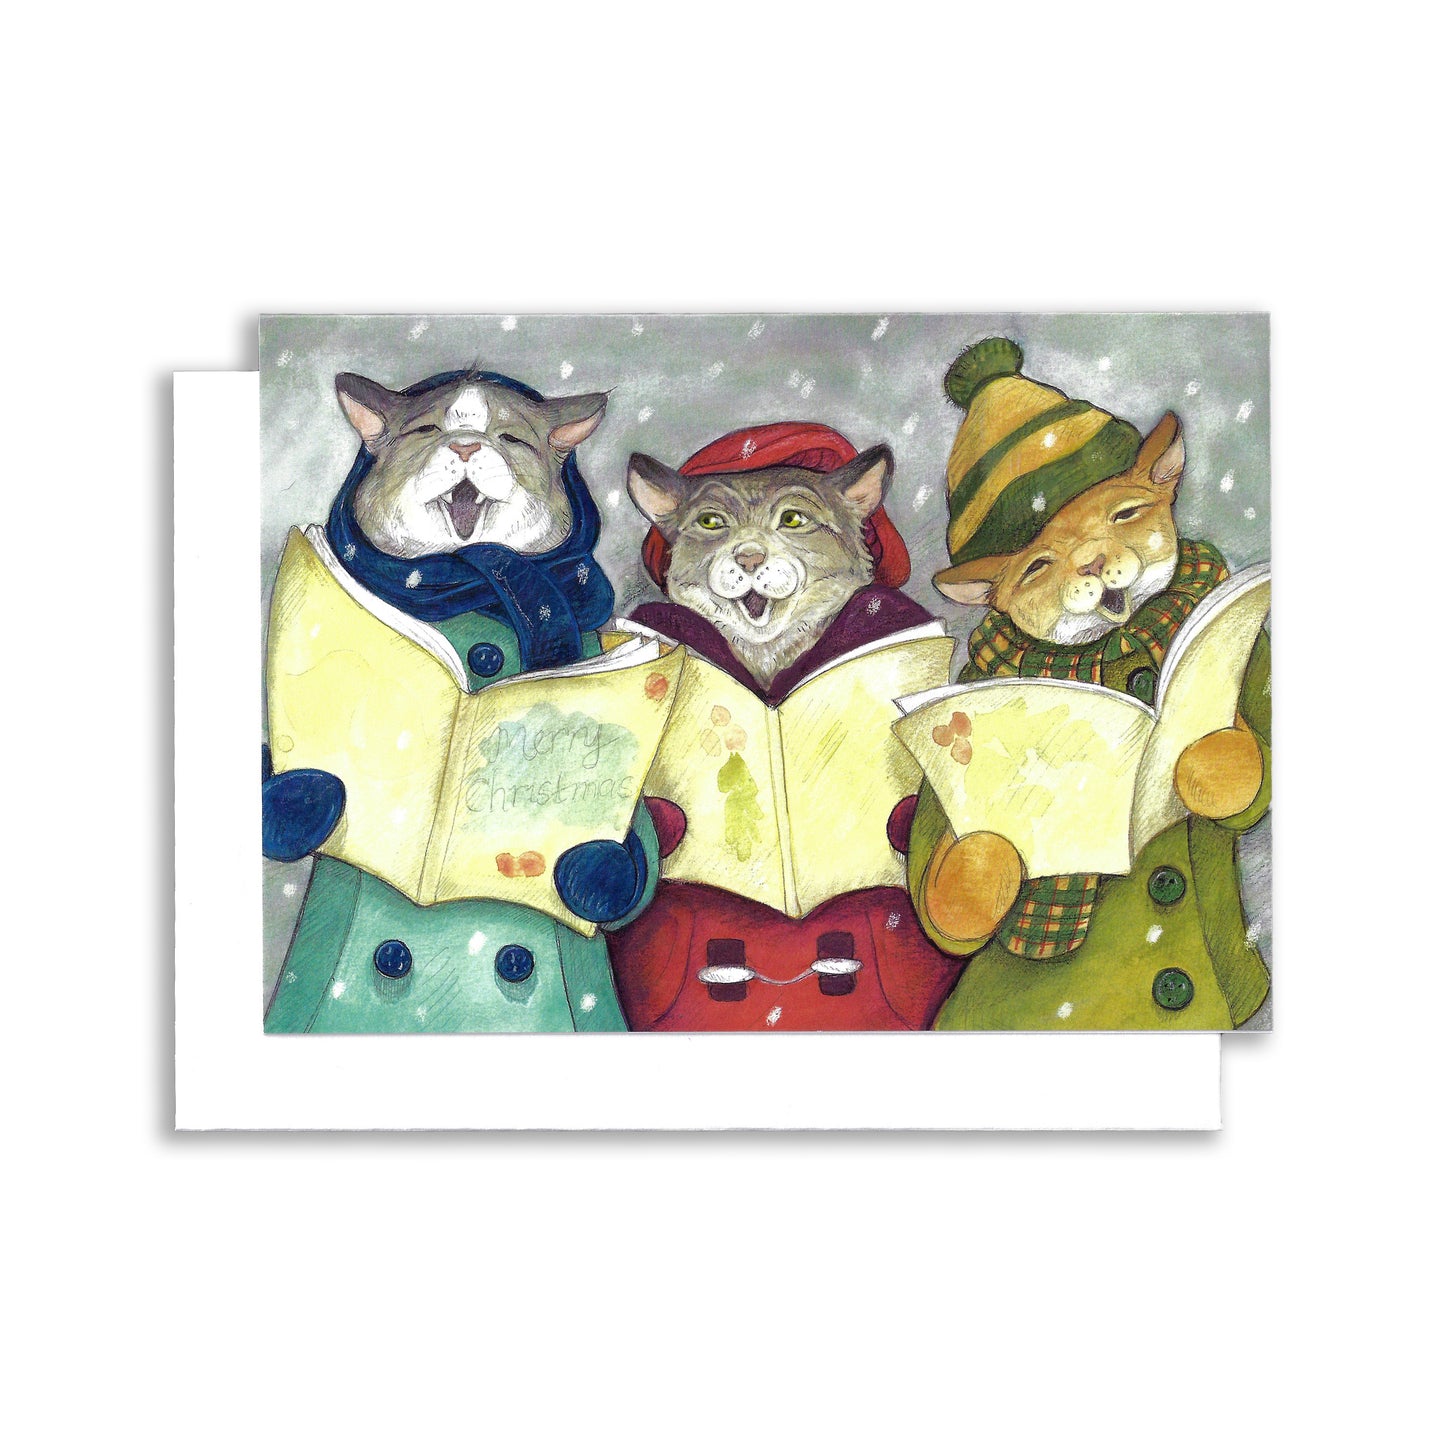 An illustrated vintage style Christmas card showing three cats singing christmas carols. The snow falls around them.